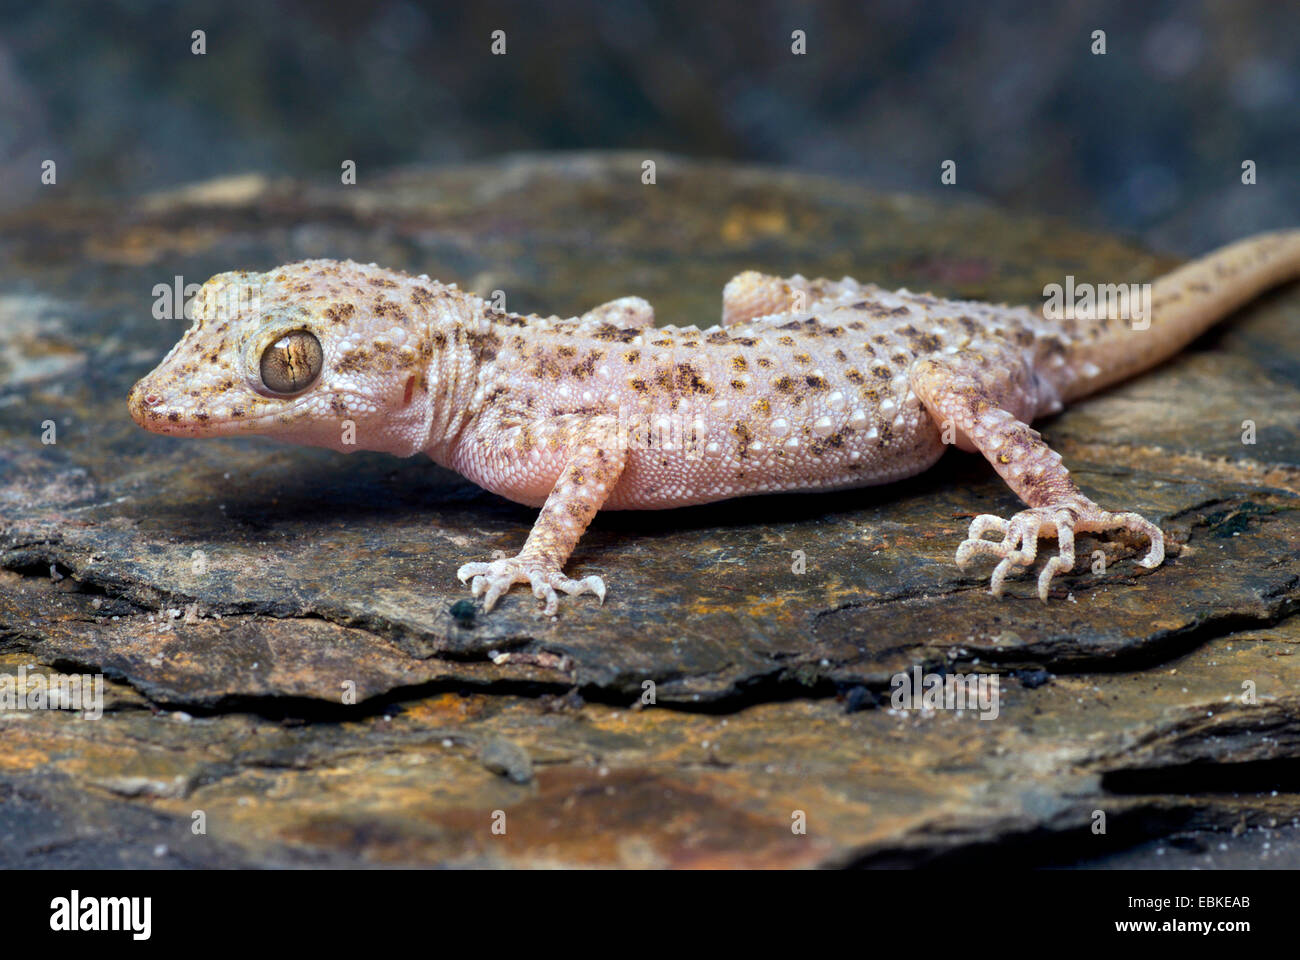 Rough-skinned gecko, Keeled gecko, Bent-toed gecko (Cyrtopodion scaber), on a stone Stock Photo